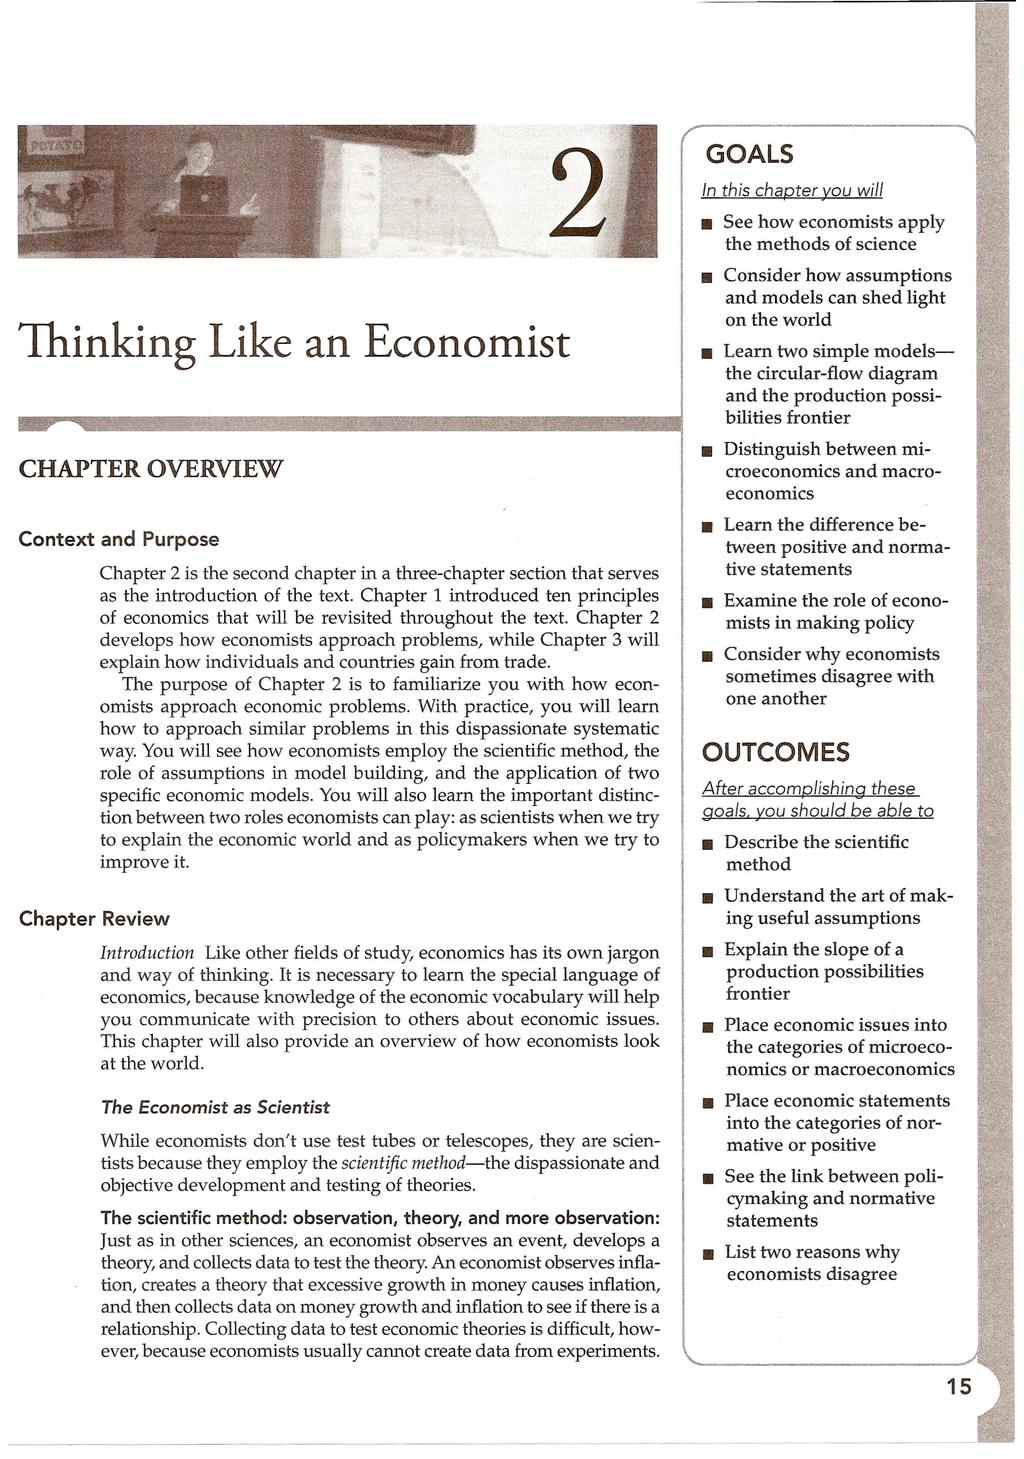 Thinking Like an Economist Context Chapter and Purpose Chapter 2 is the second chapter in a three-chapter section that serves as the introduction of the text.